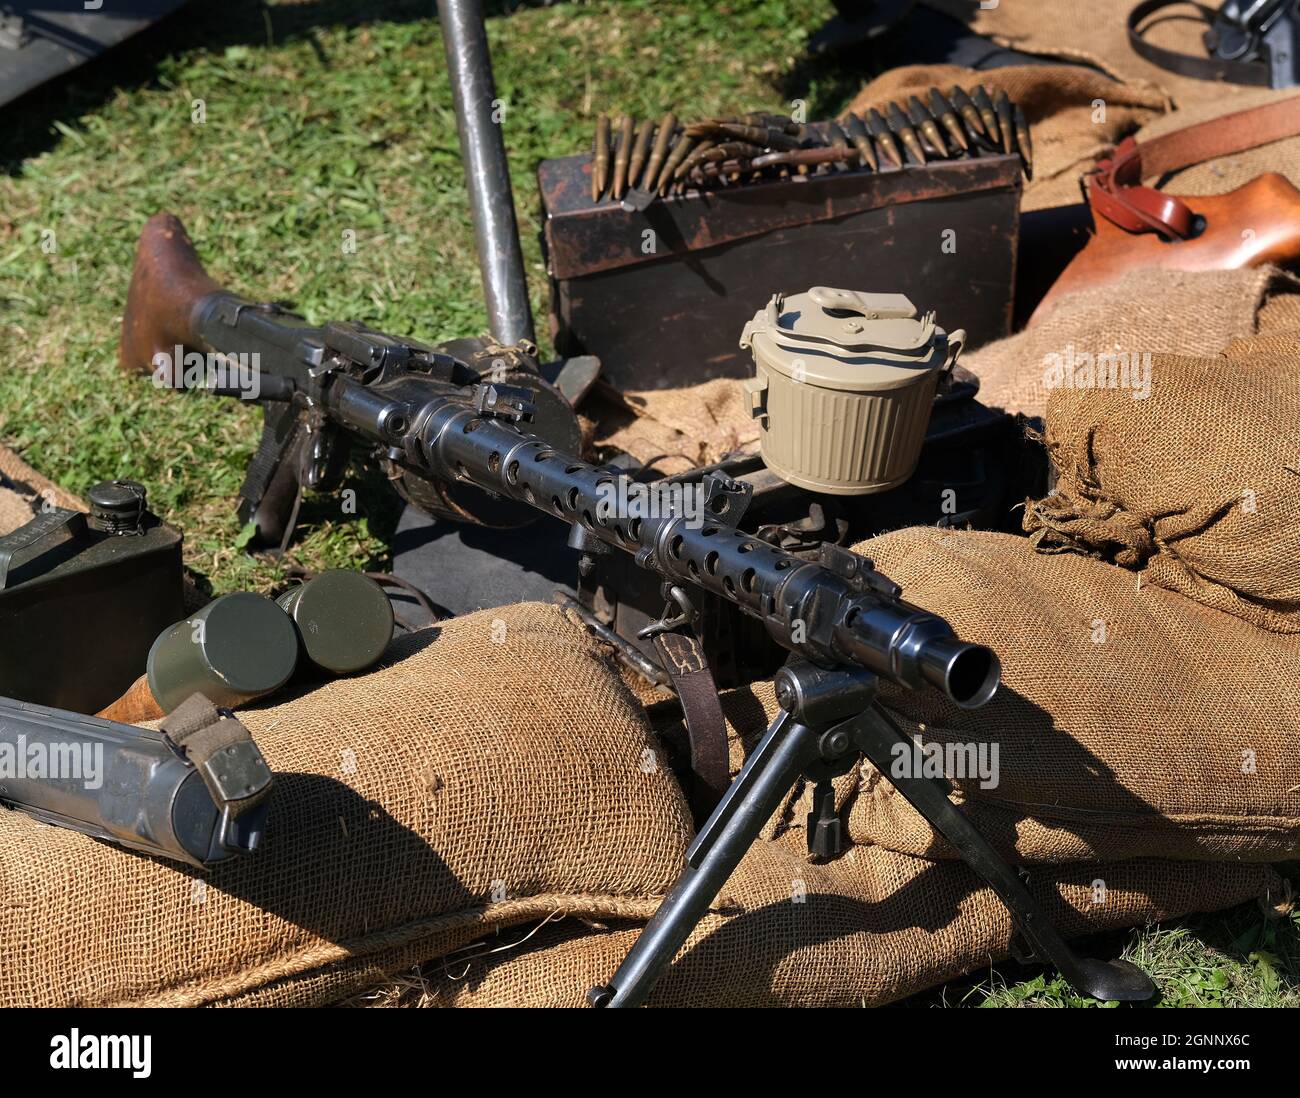 The MG 34 is a German recoil-operated air-cooled machine gun, first tested in 1929, and issued to units in 1936.  MG 42, cheaper. version. Stock Photo